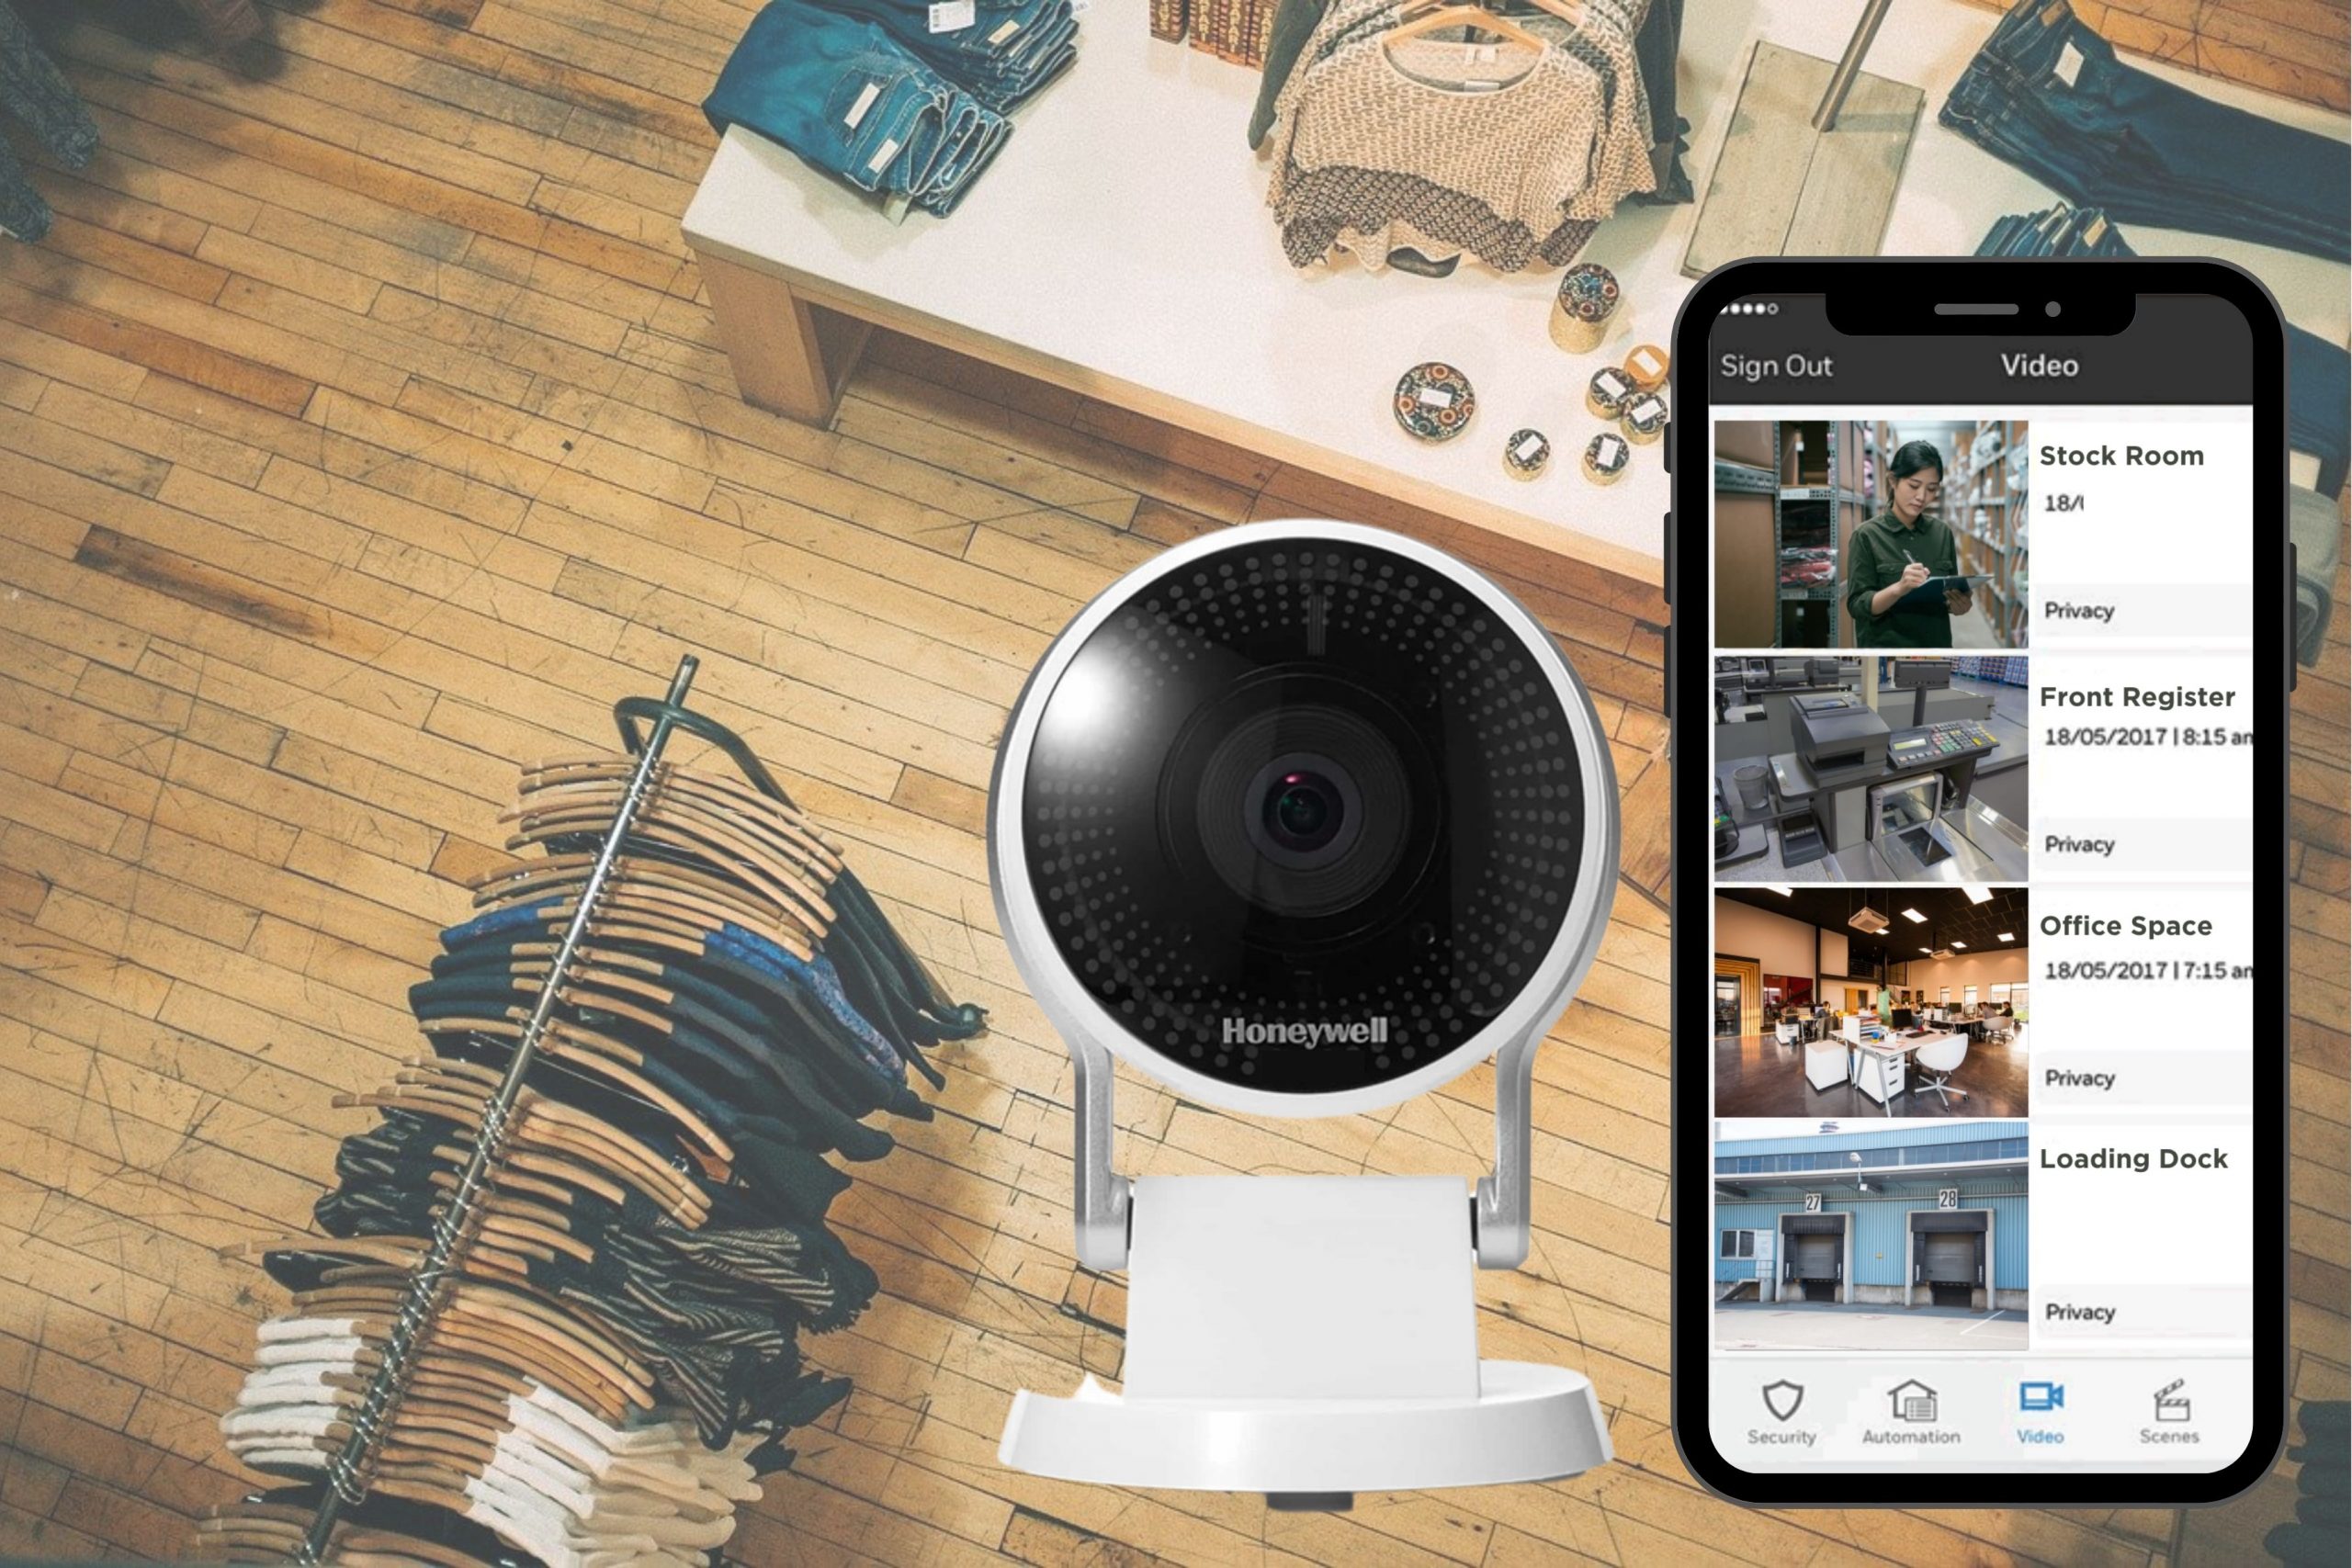 A security camera with an app on a mobile device for viewing